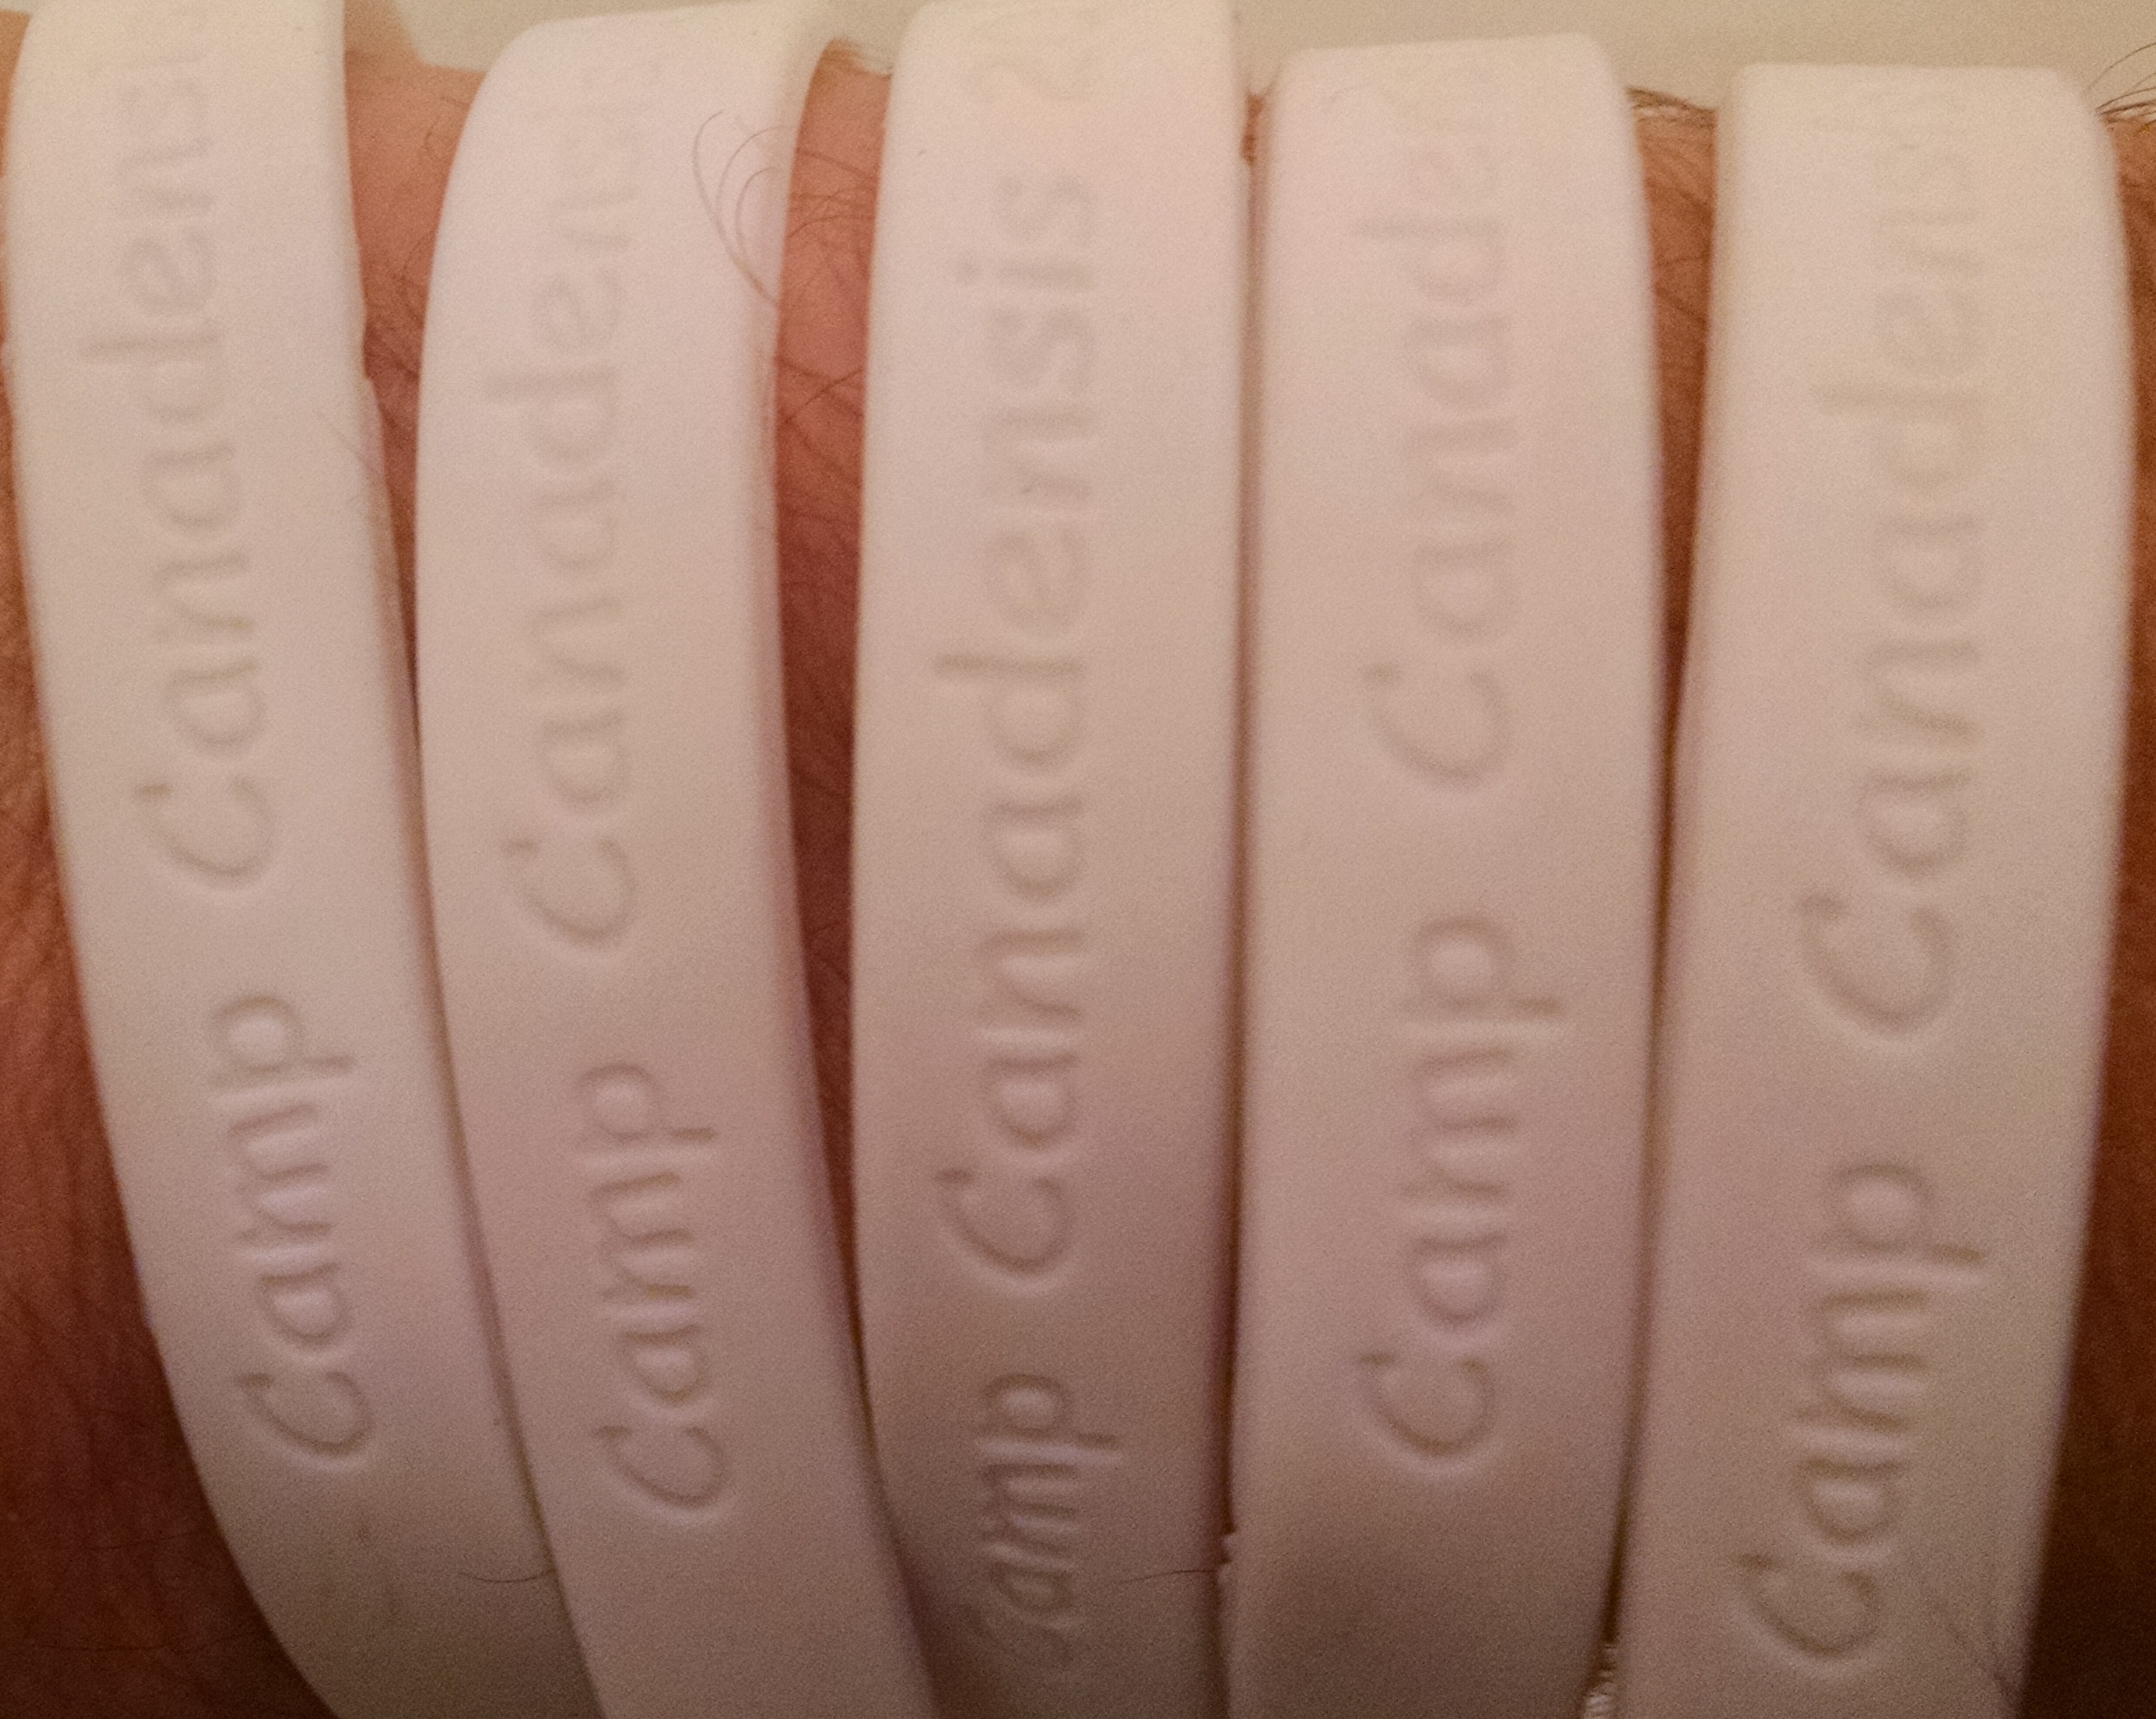 White Team Band Call Bands will be sent to the first five campers or staff that can correctly answer my BLOG BAND CALL question.